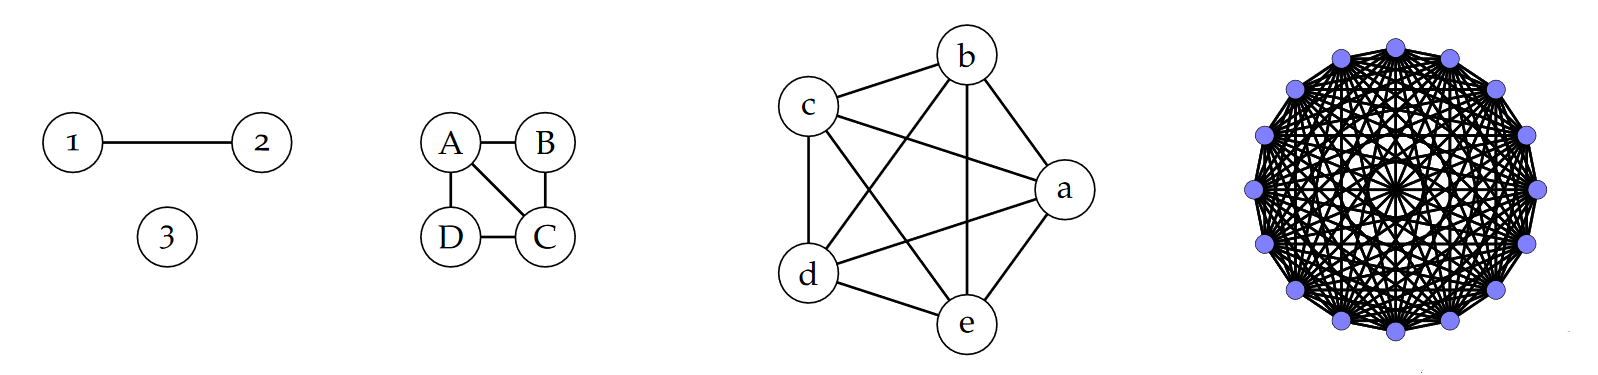 Example graphs